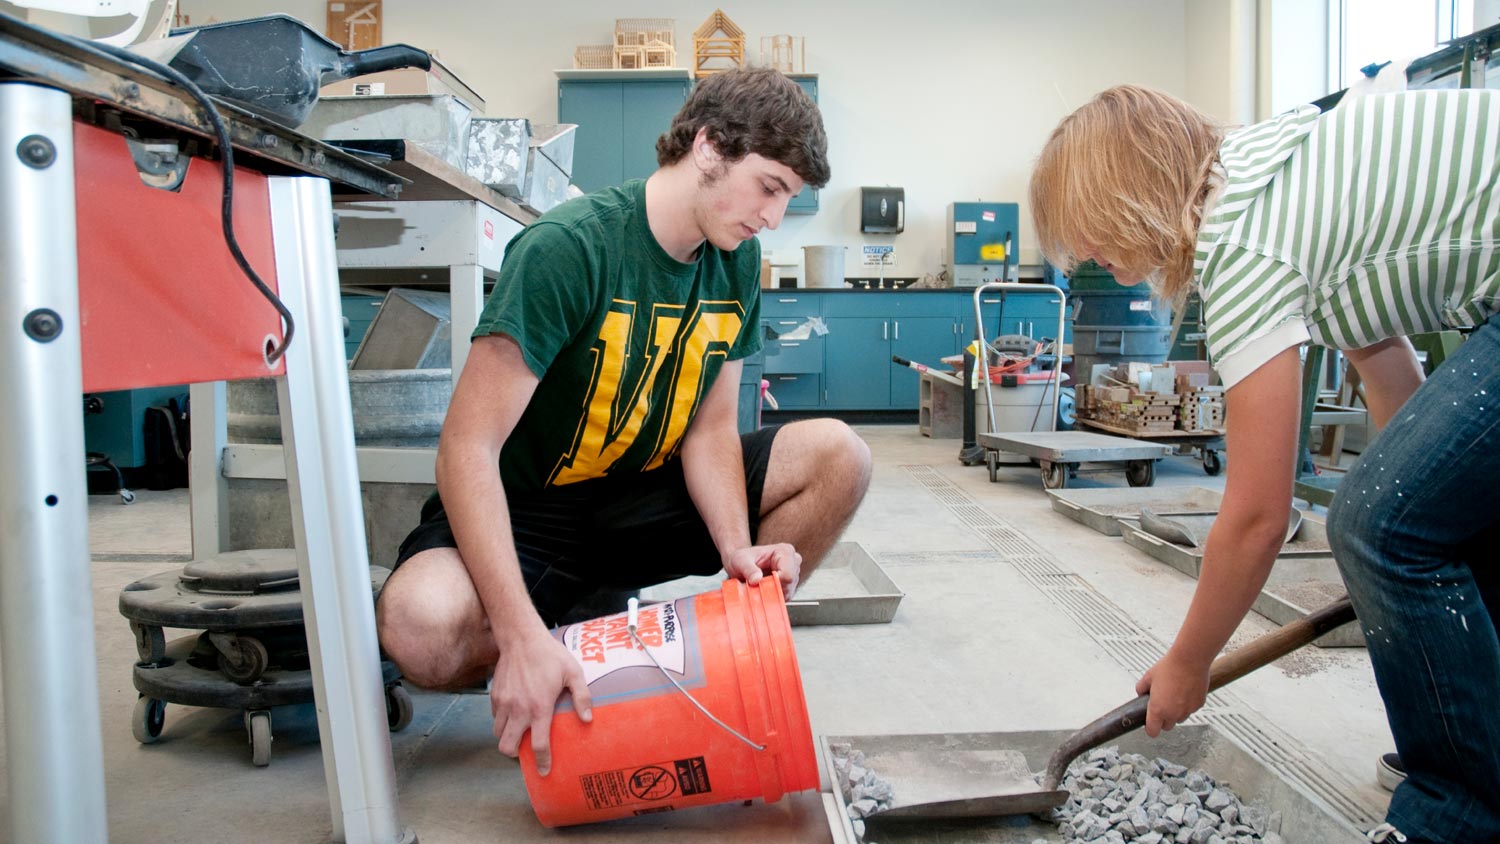 Two students scooping small stones into a 5 gallon bucket